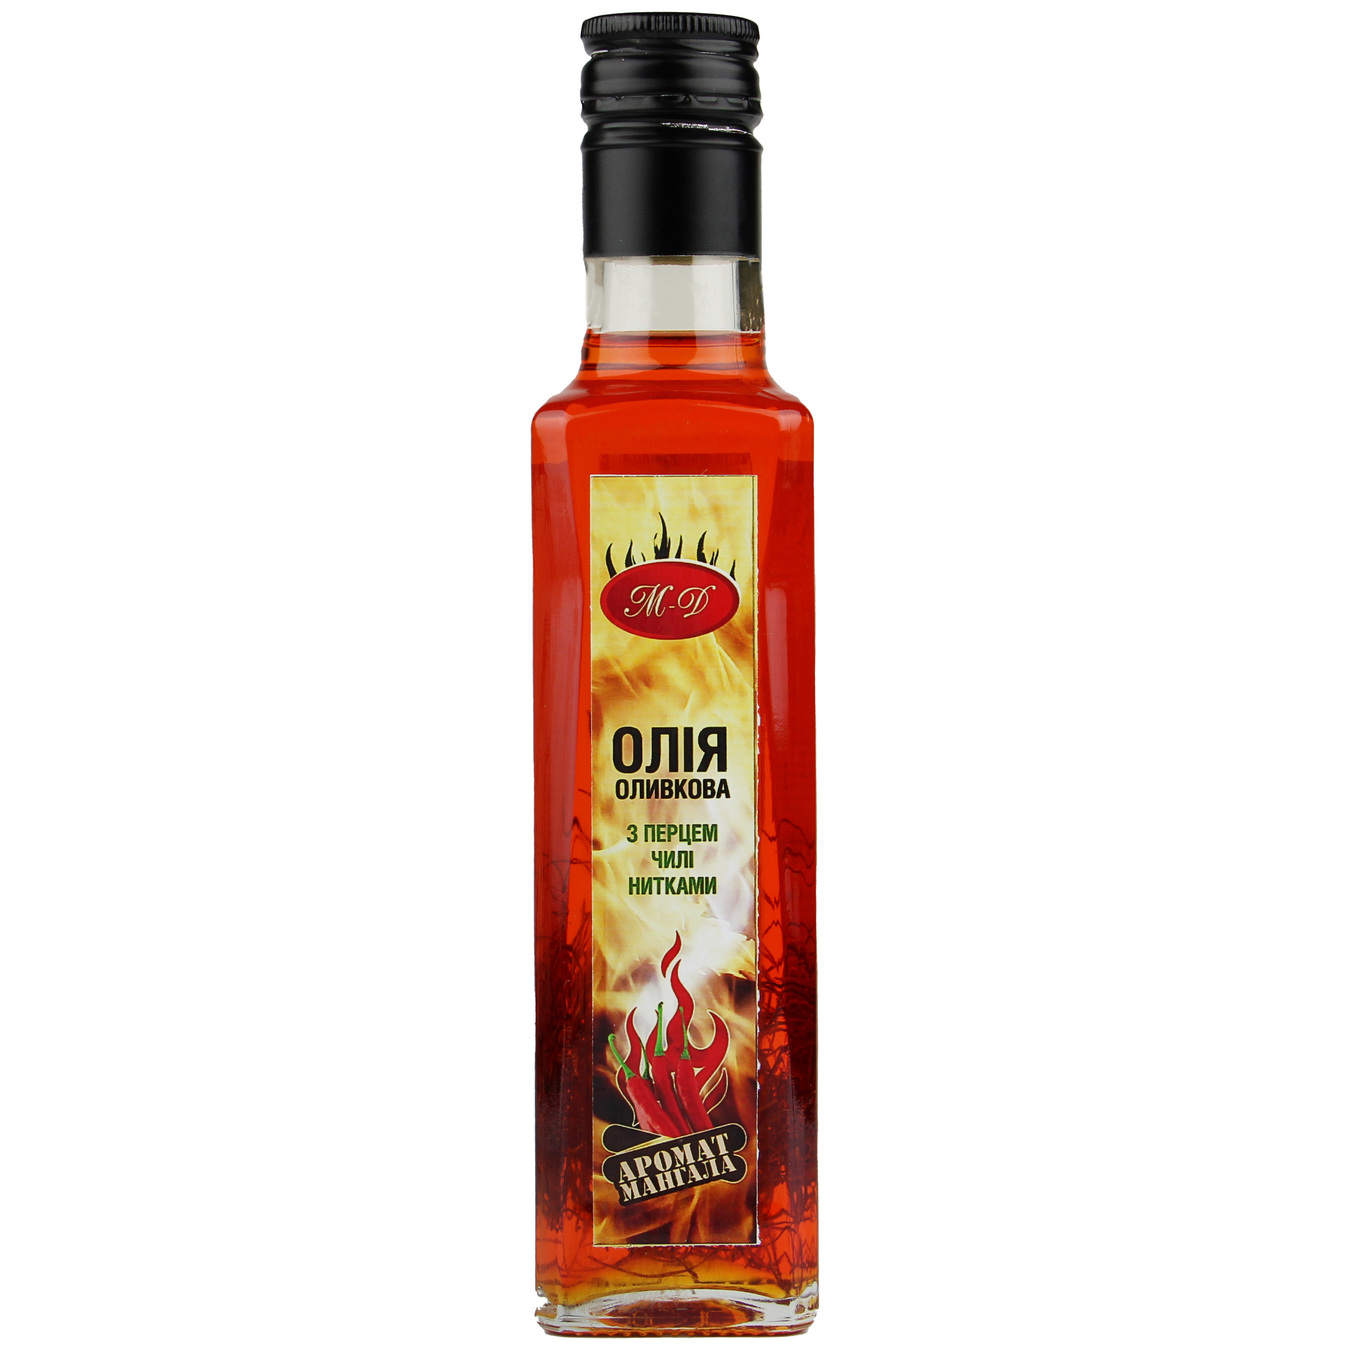 Olive oil Mc-Day with chili pepper and barbecue flavor 200ml glass